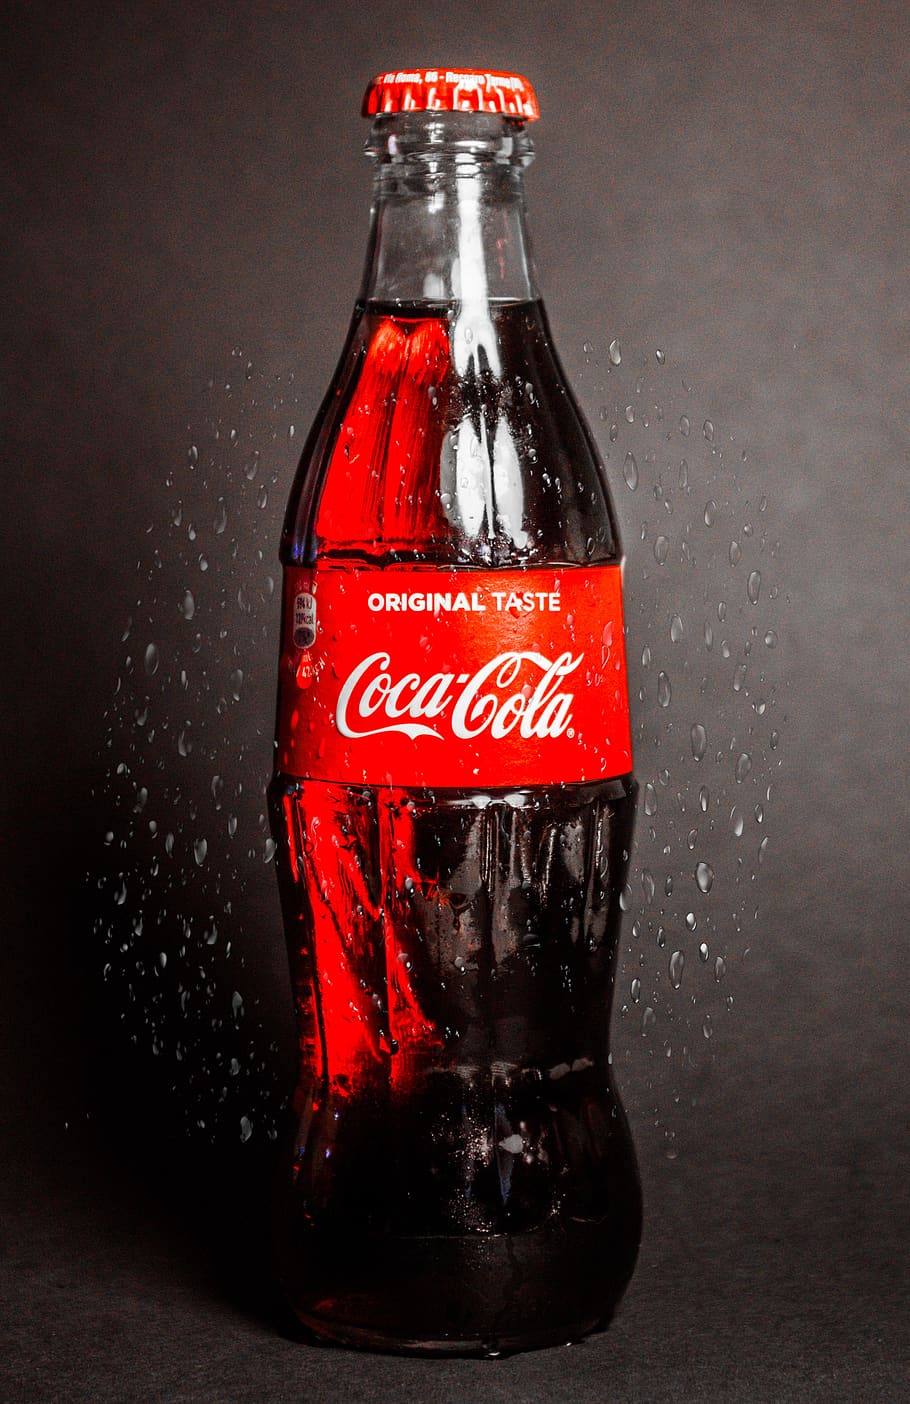 coca-cola, the coca-cola company, bottle, drink, glass, celebrate, sparkling, bubbles, holiday, red